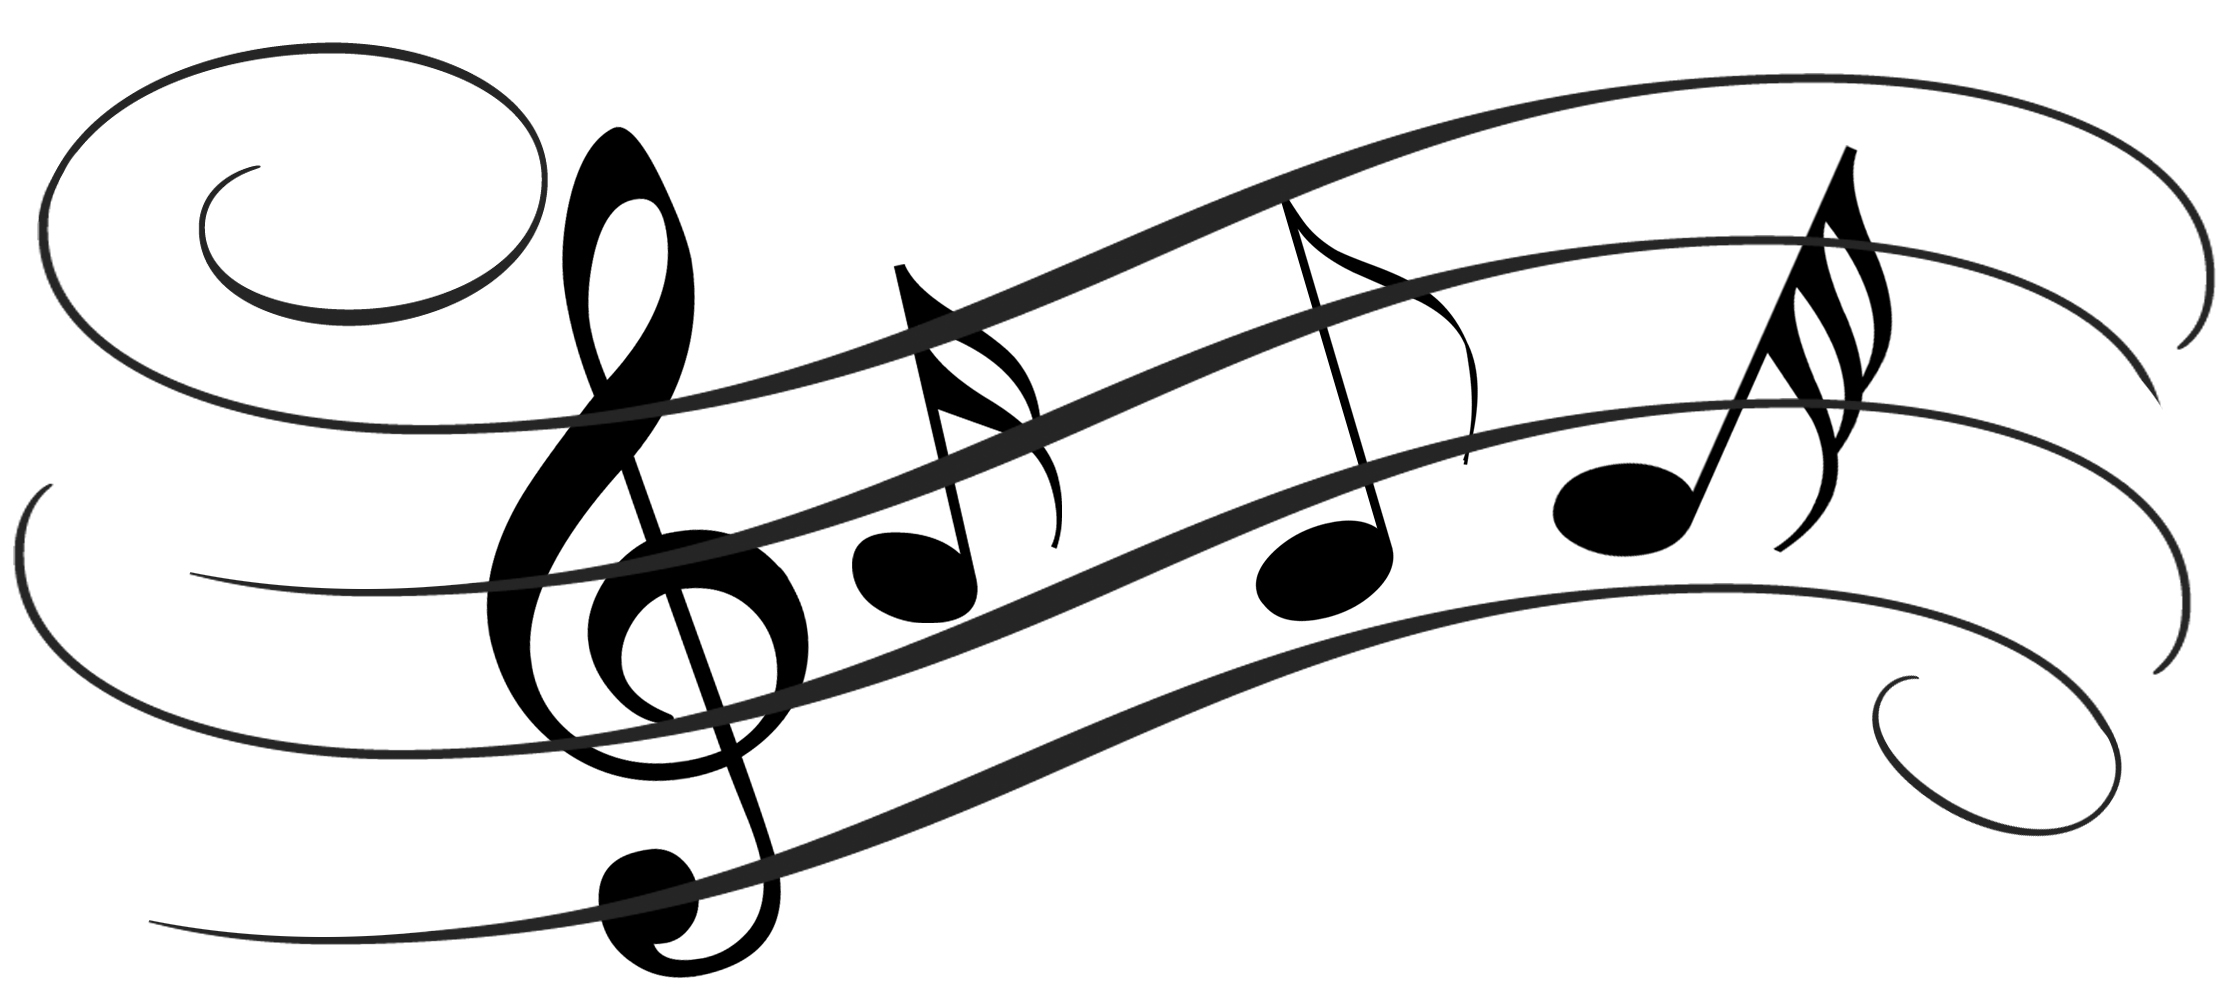 Music staff music notes on staff clipart free images 2